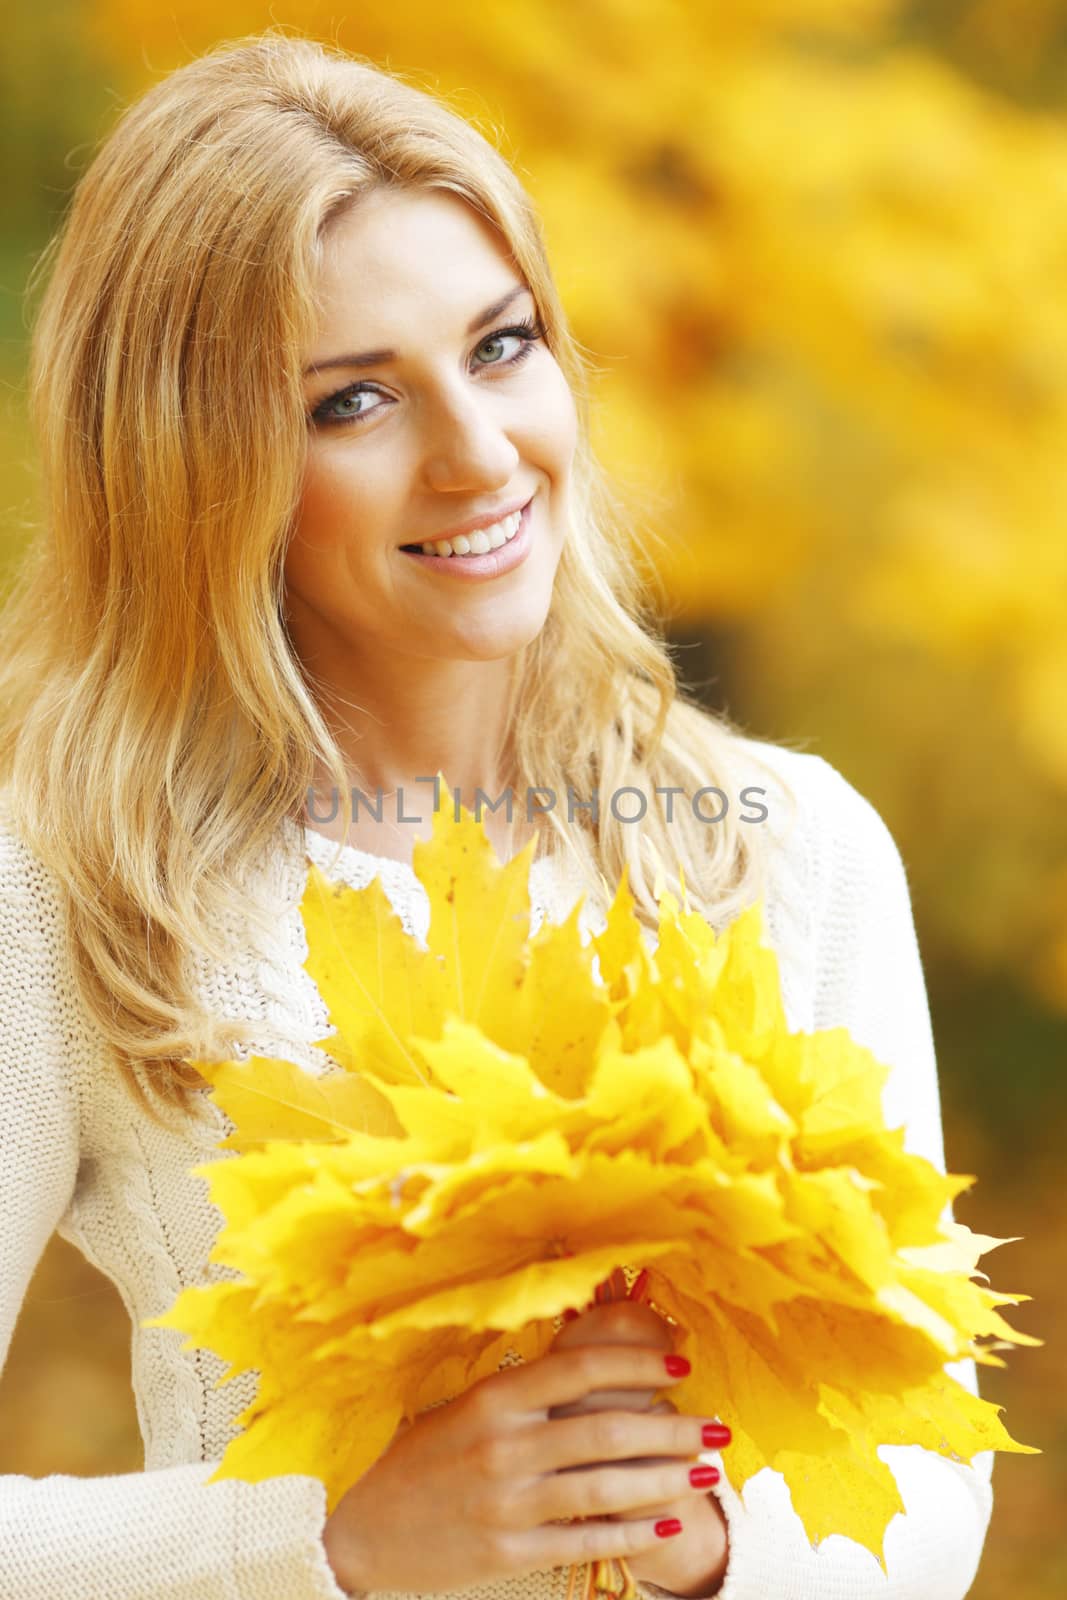 Portrait of a beautiful smiling woman in the autumn park